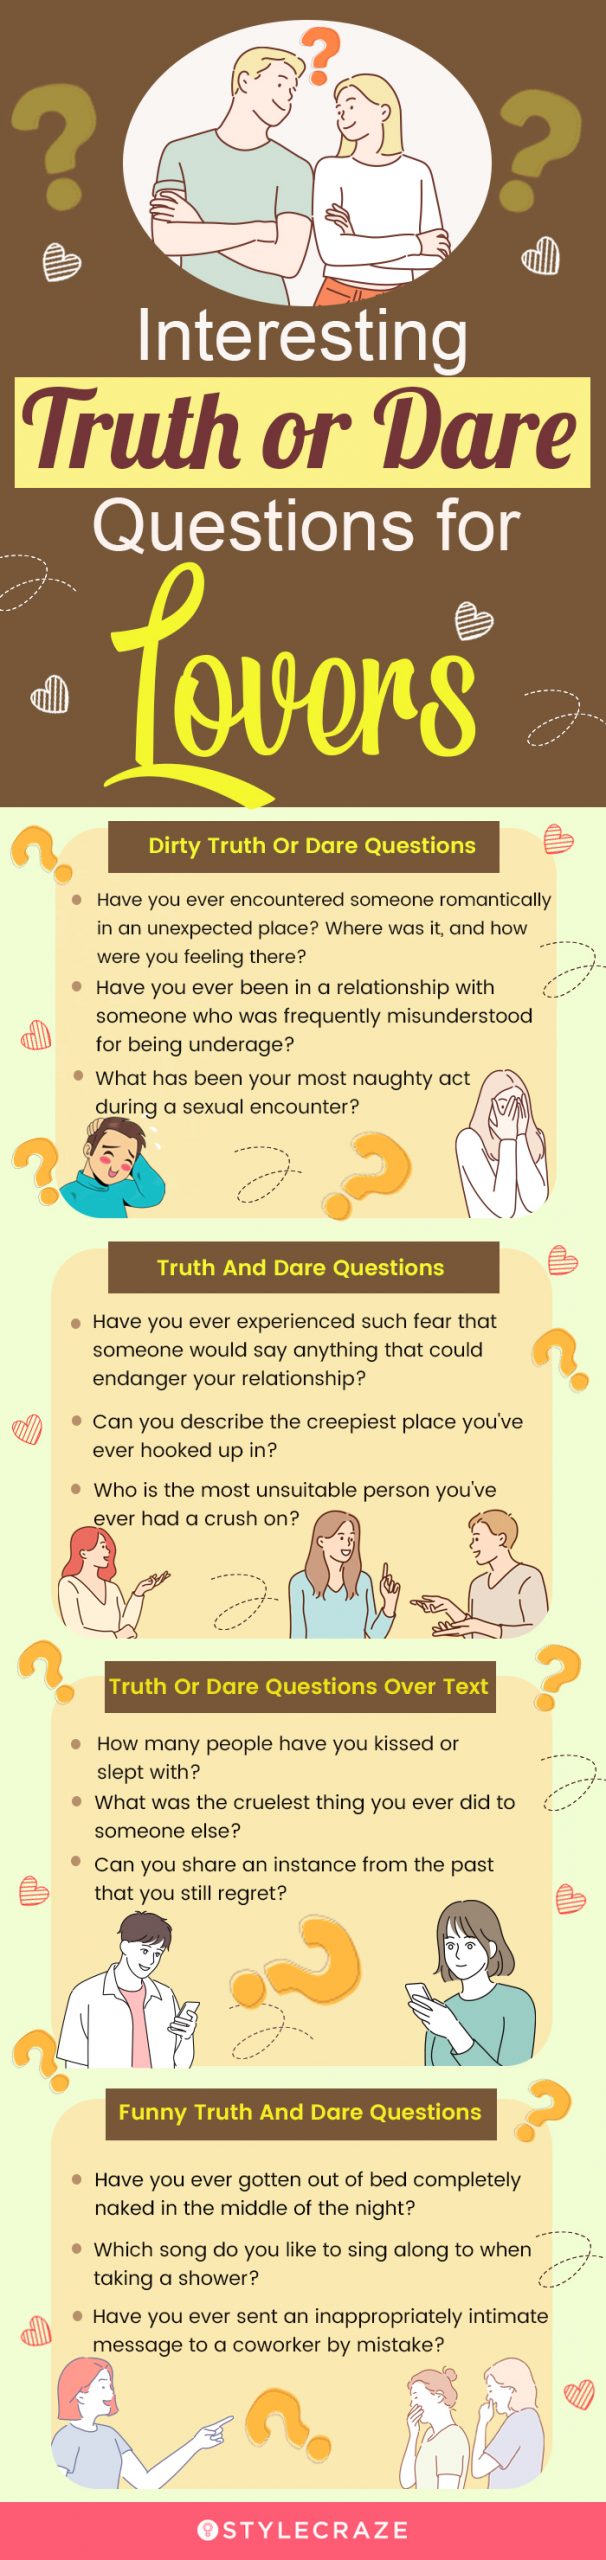 interesting truth or dare questions for lovers [infographic]